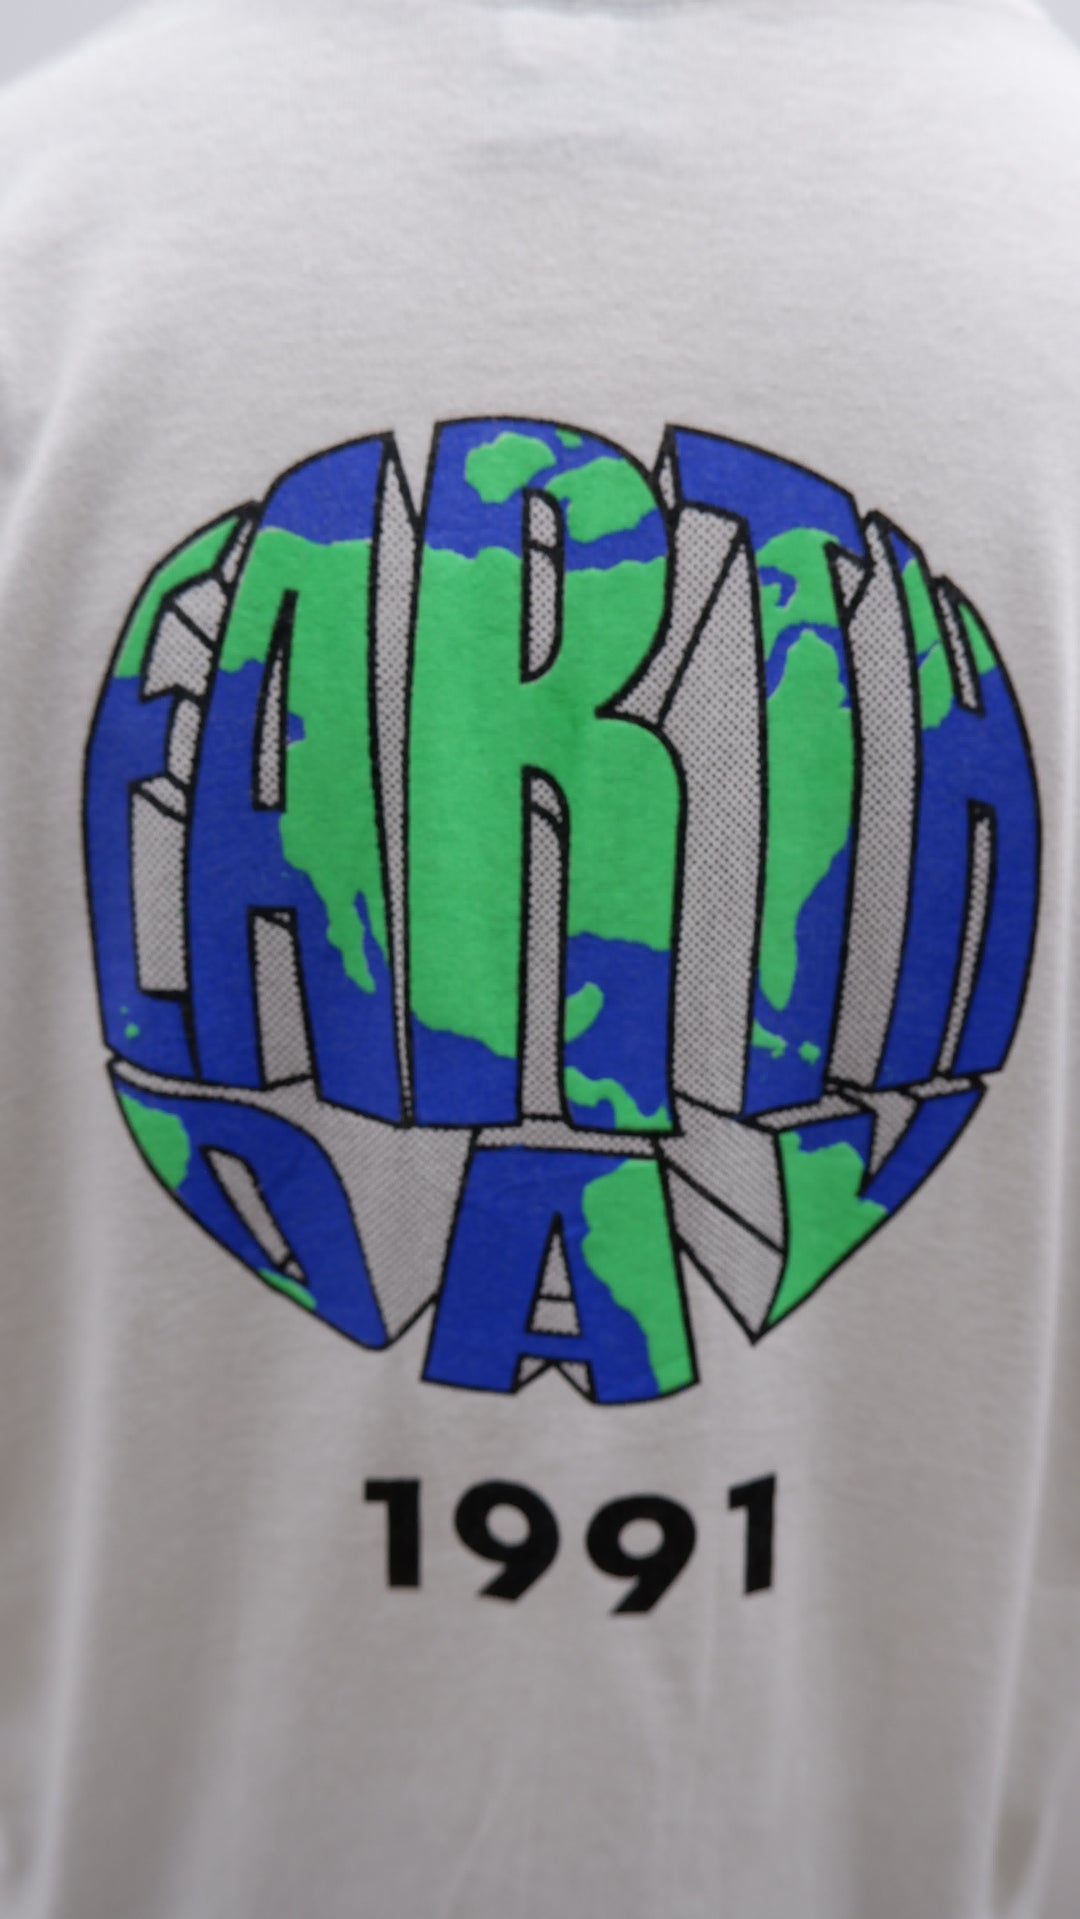 Vintage 1991 Earth Day ' There Is Only One' T-Shirt Single Stitch Made In USA